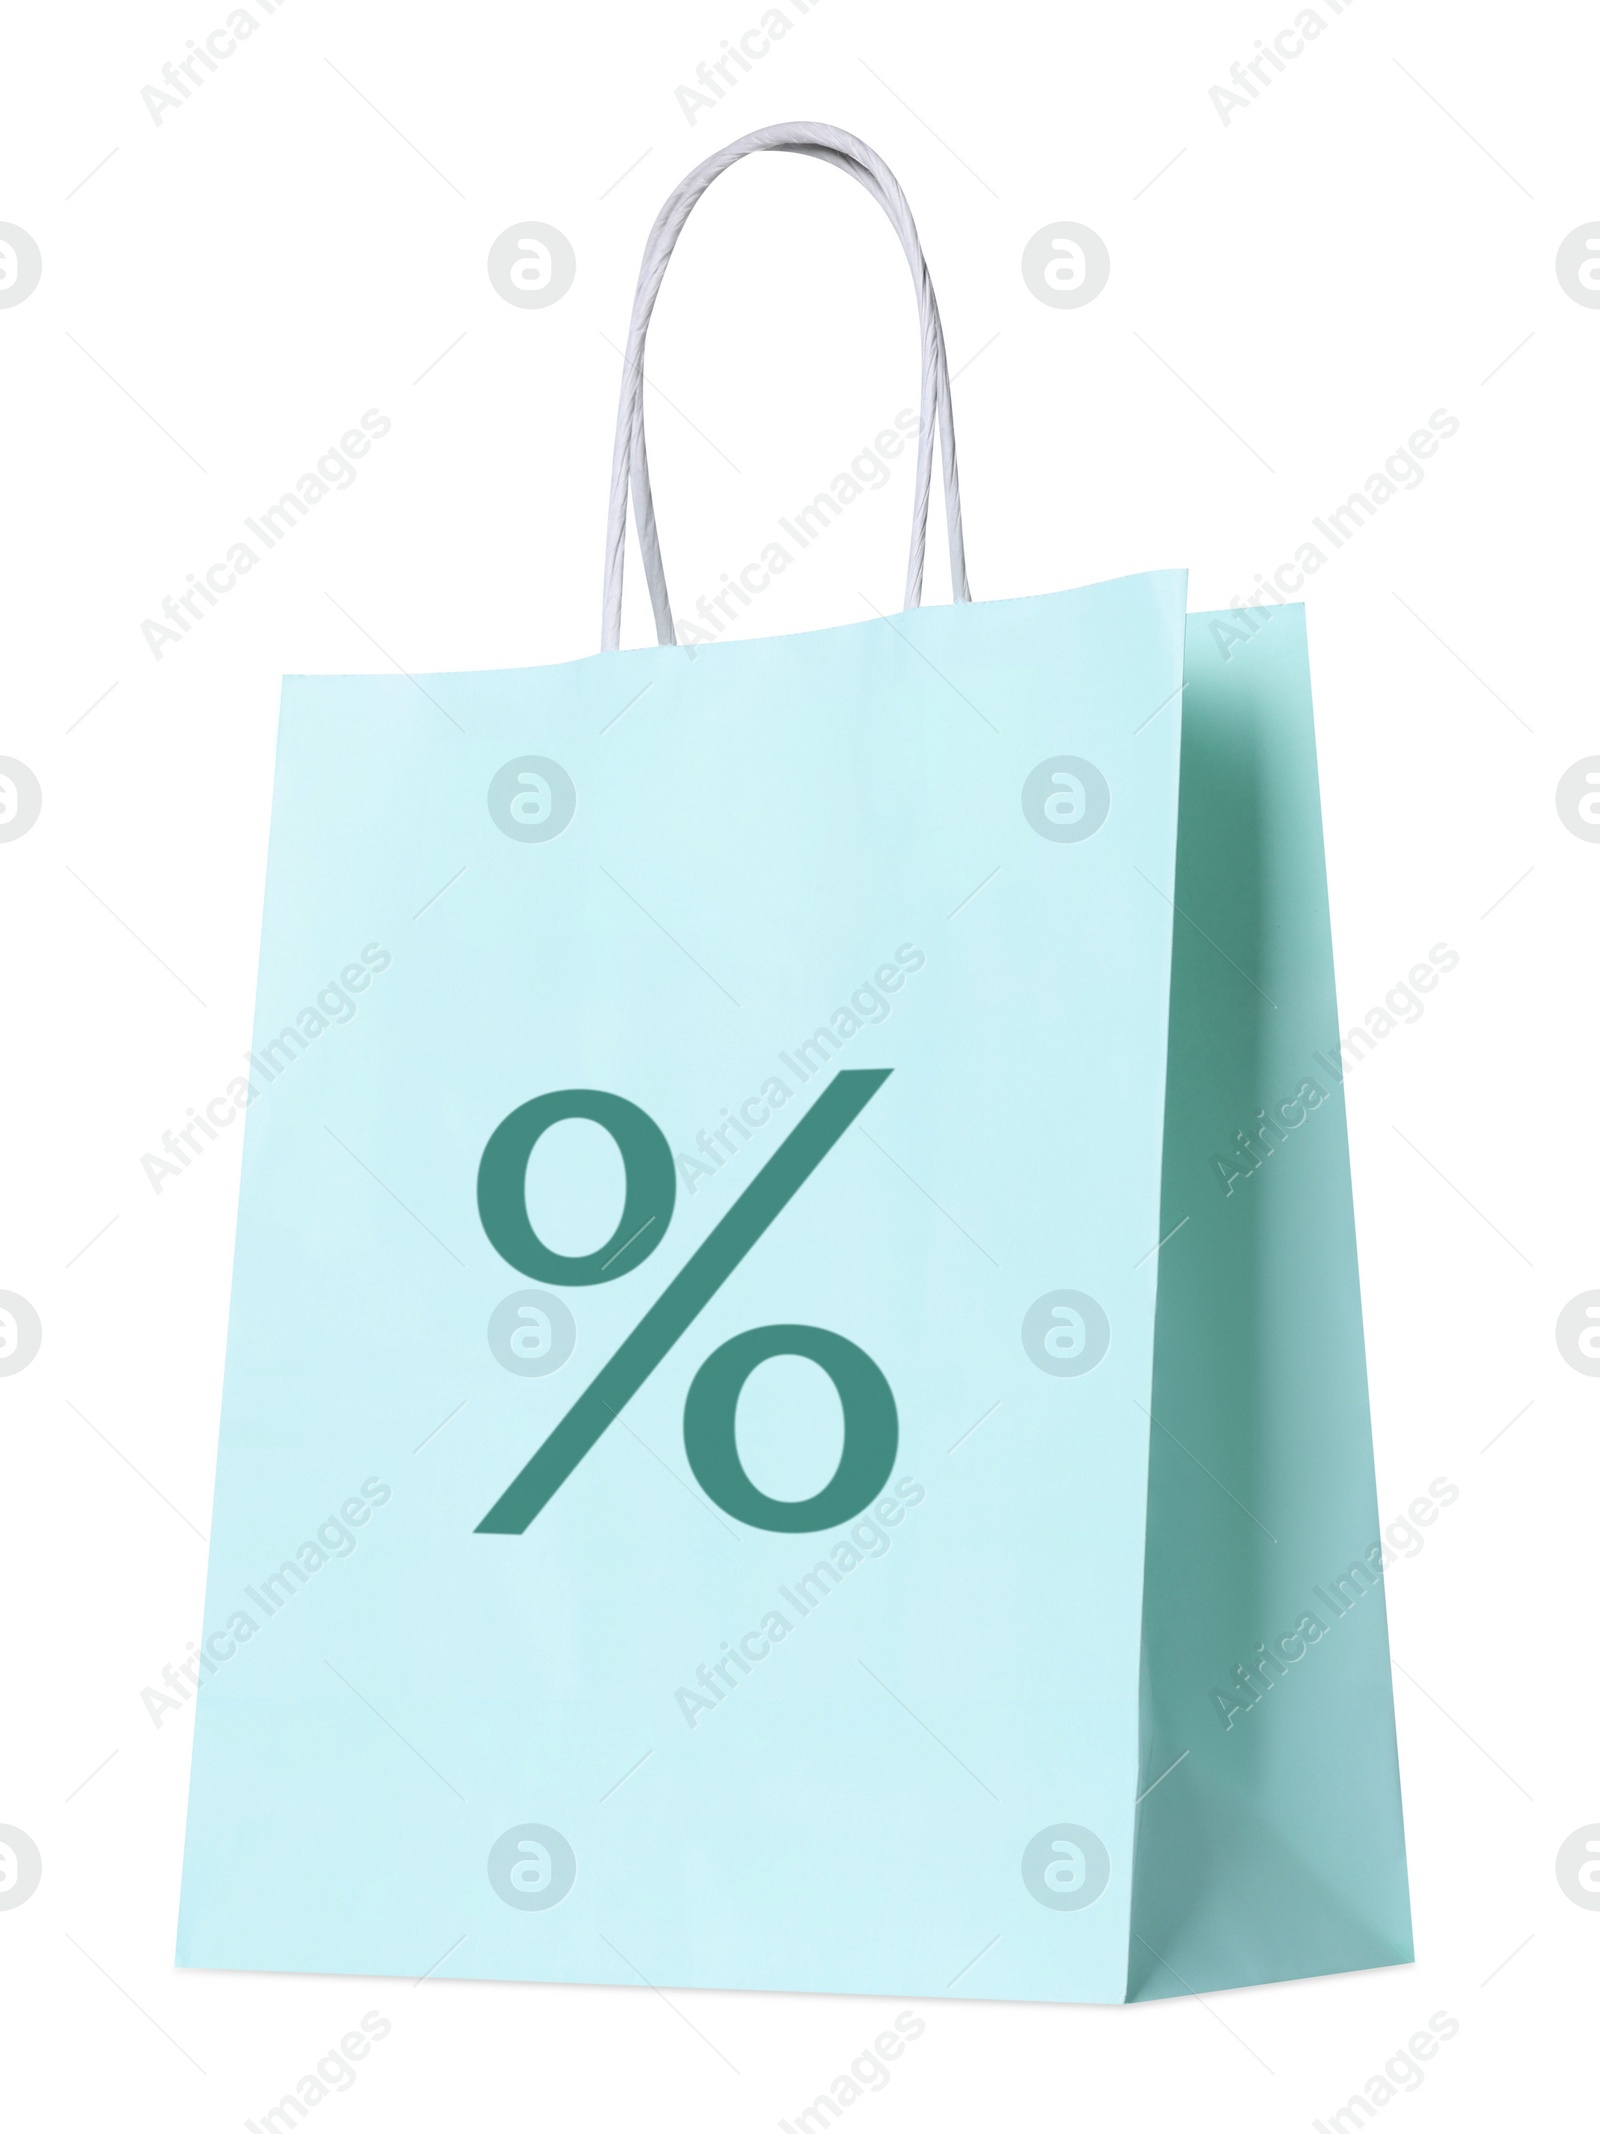 Image of Light blue paper bag with teal percent sign isolated on white